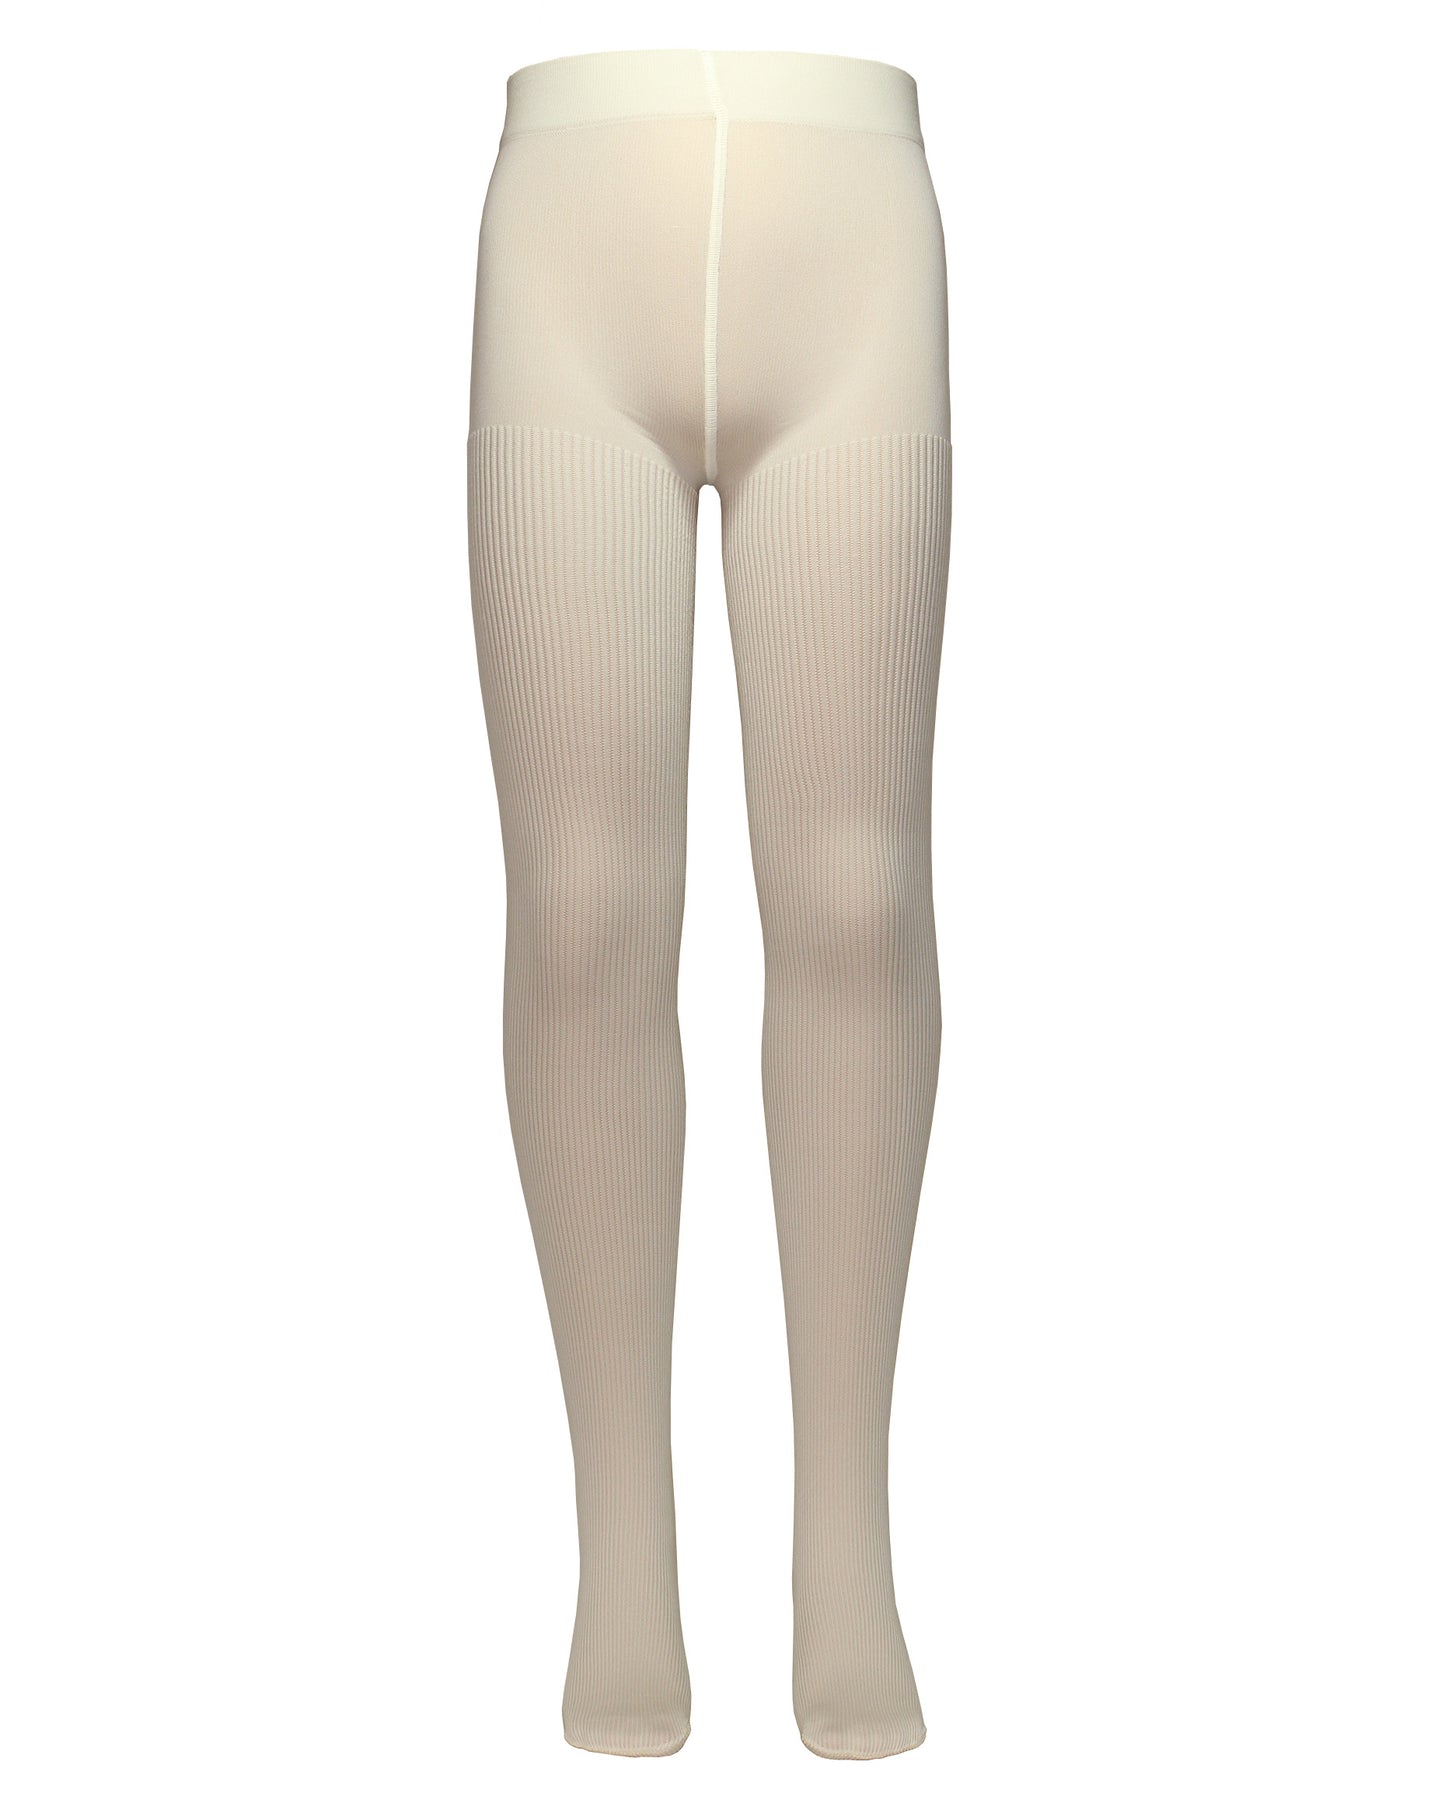 Omsa Serenella Cinderella Collant - Cream soft opaque ribbed children's tights with a plain smooth boxer top and deep comfort waist band.